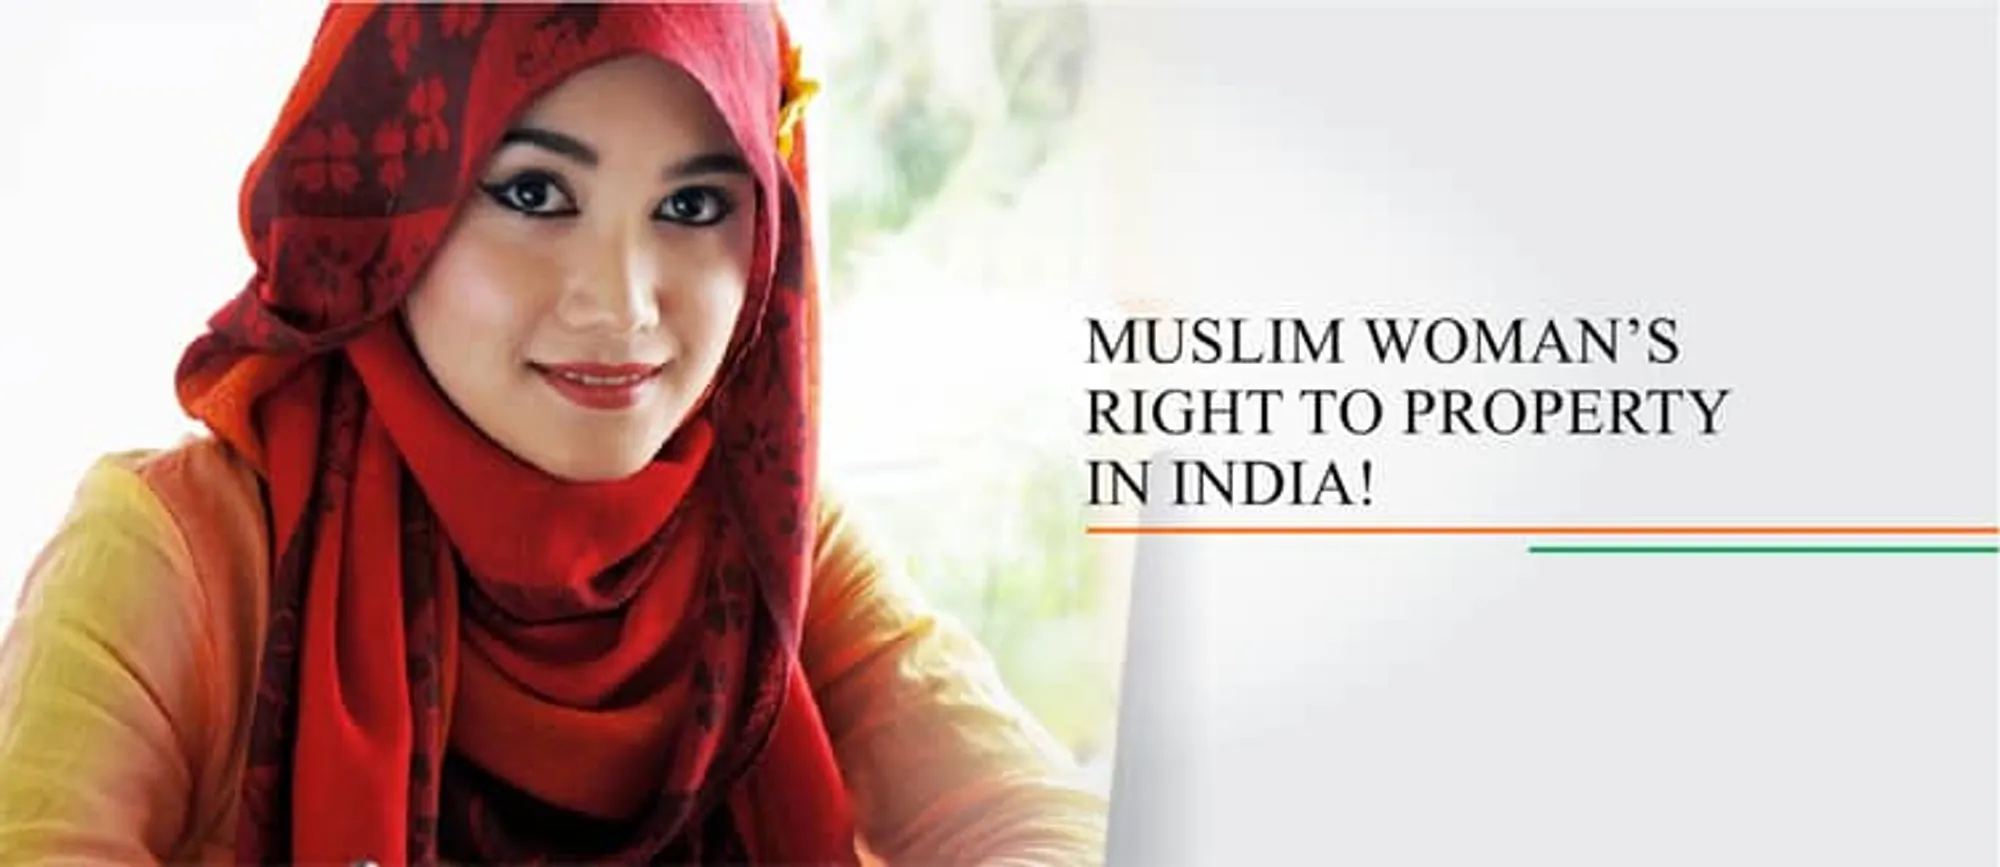 Muslim Woman’s Right to Property in India!